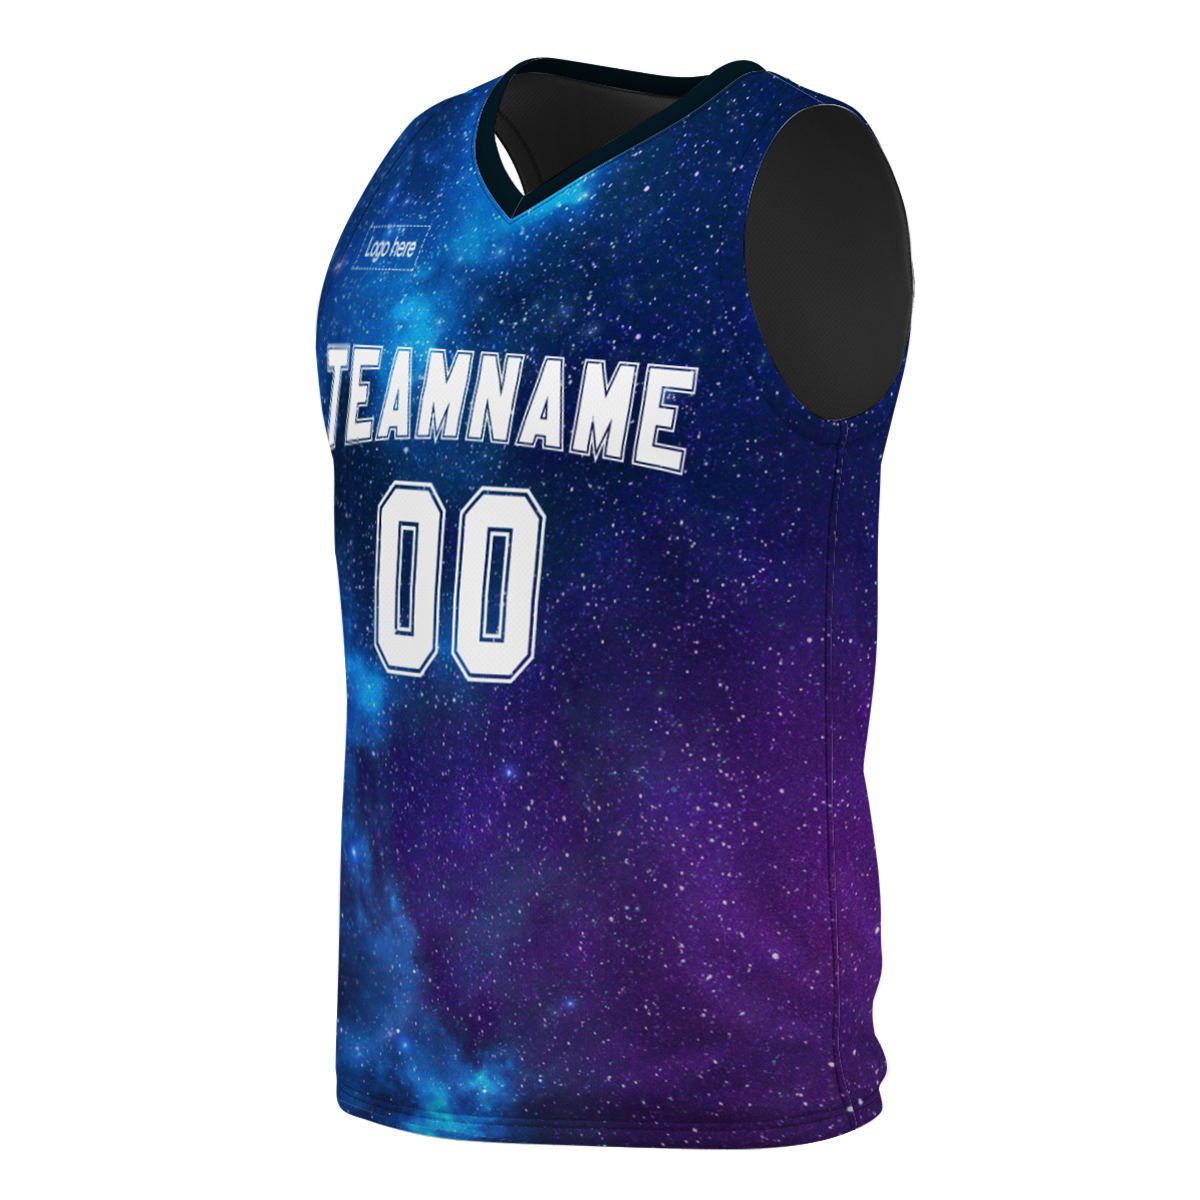 newest-sports-basketball-jersey-uniforms-design-sublimation-customize-print-on-demand-basketball-suits-at-cj-pod-5